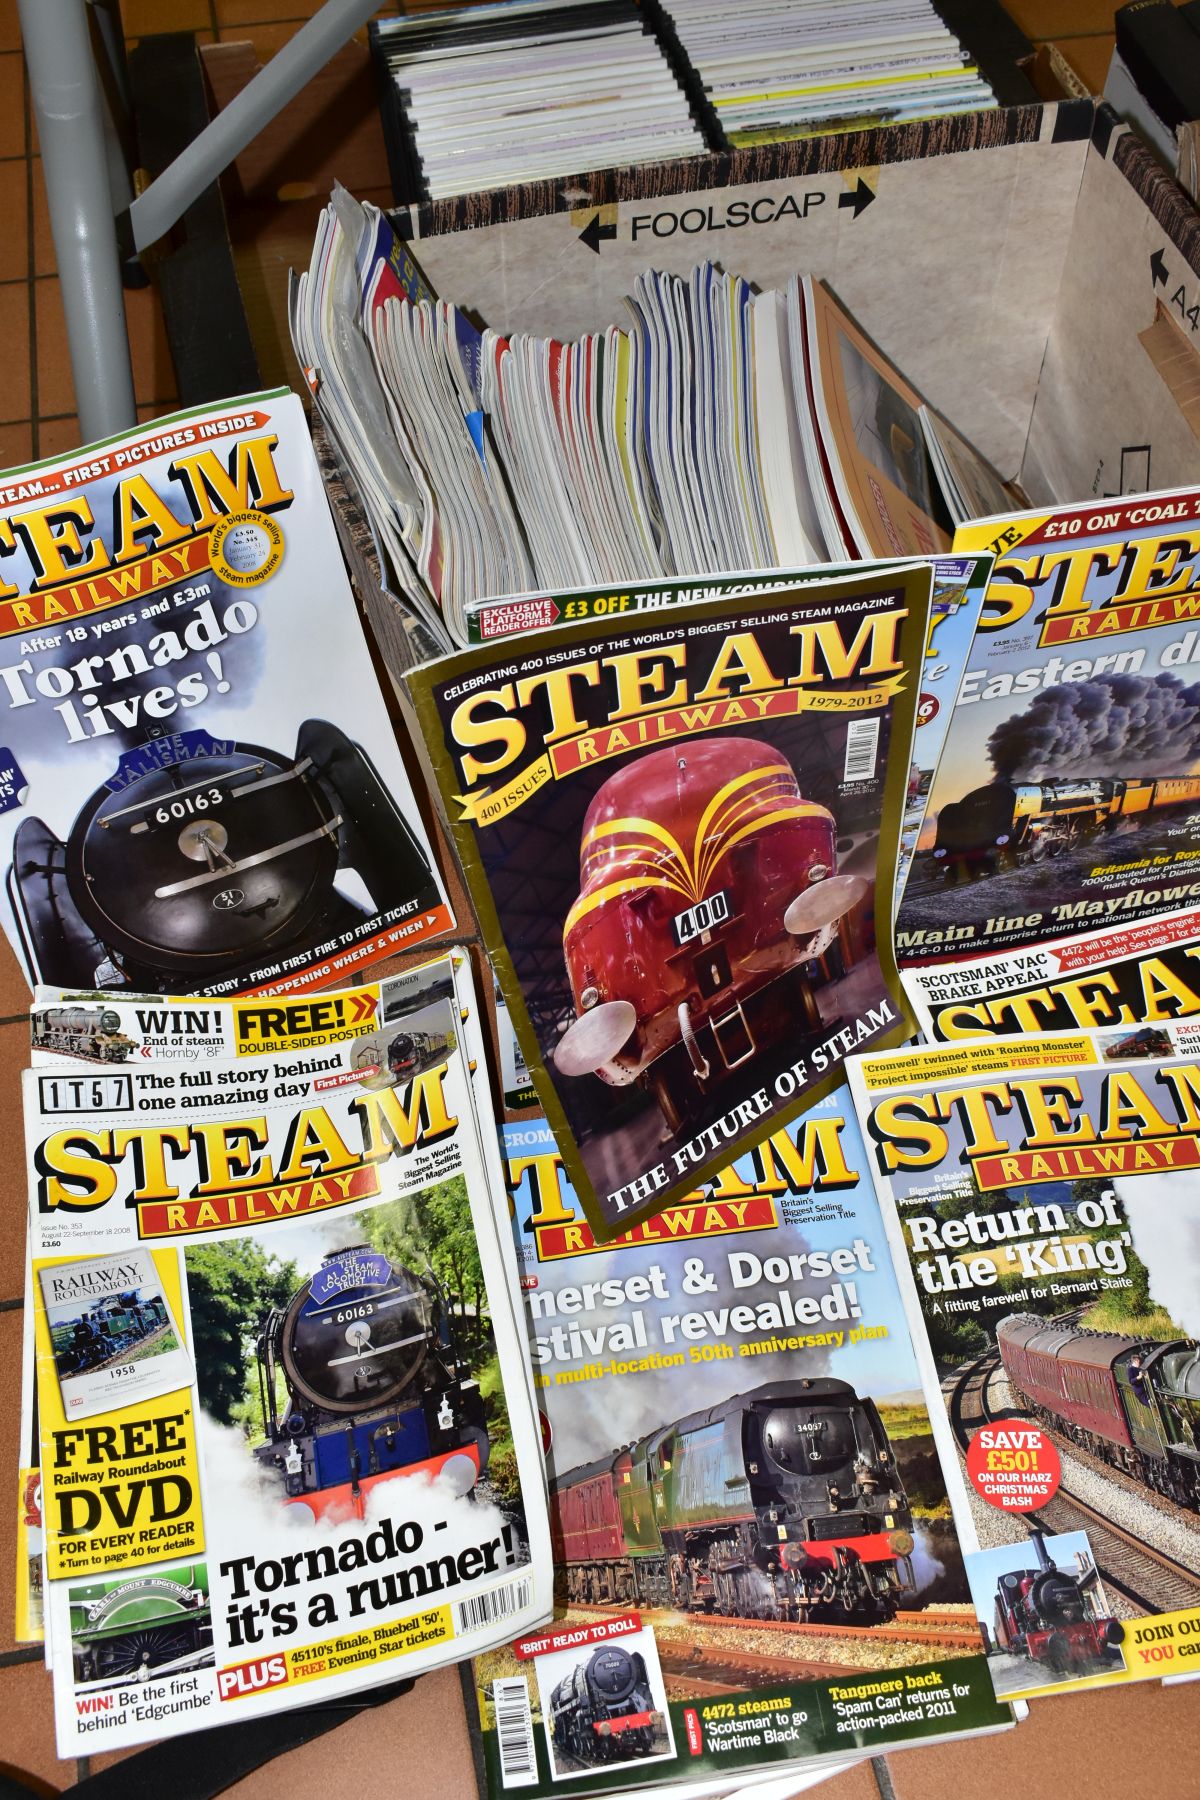 A QUANTITY OF RAILWAY RELATED DVD'S AND MAGAZINES, DVD's to include many rail tour related titles - Image 3 of 3